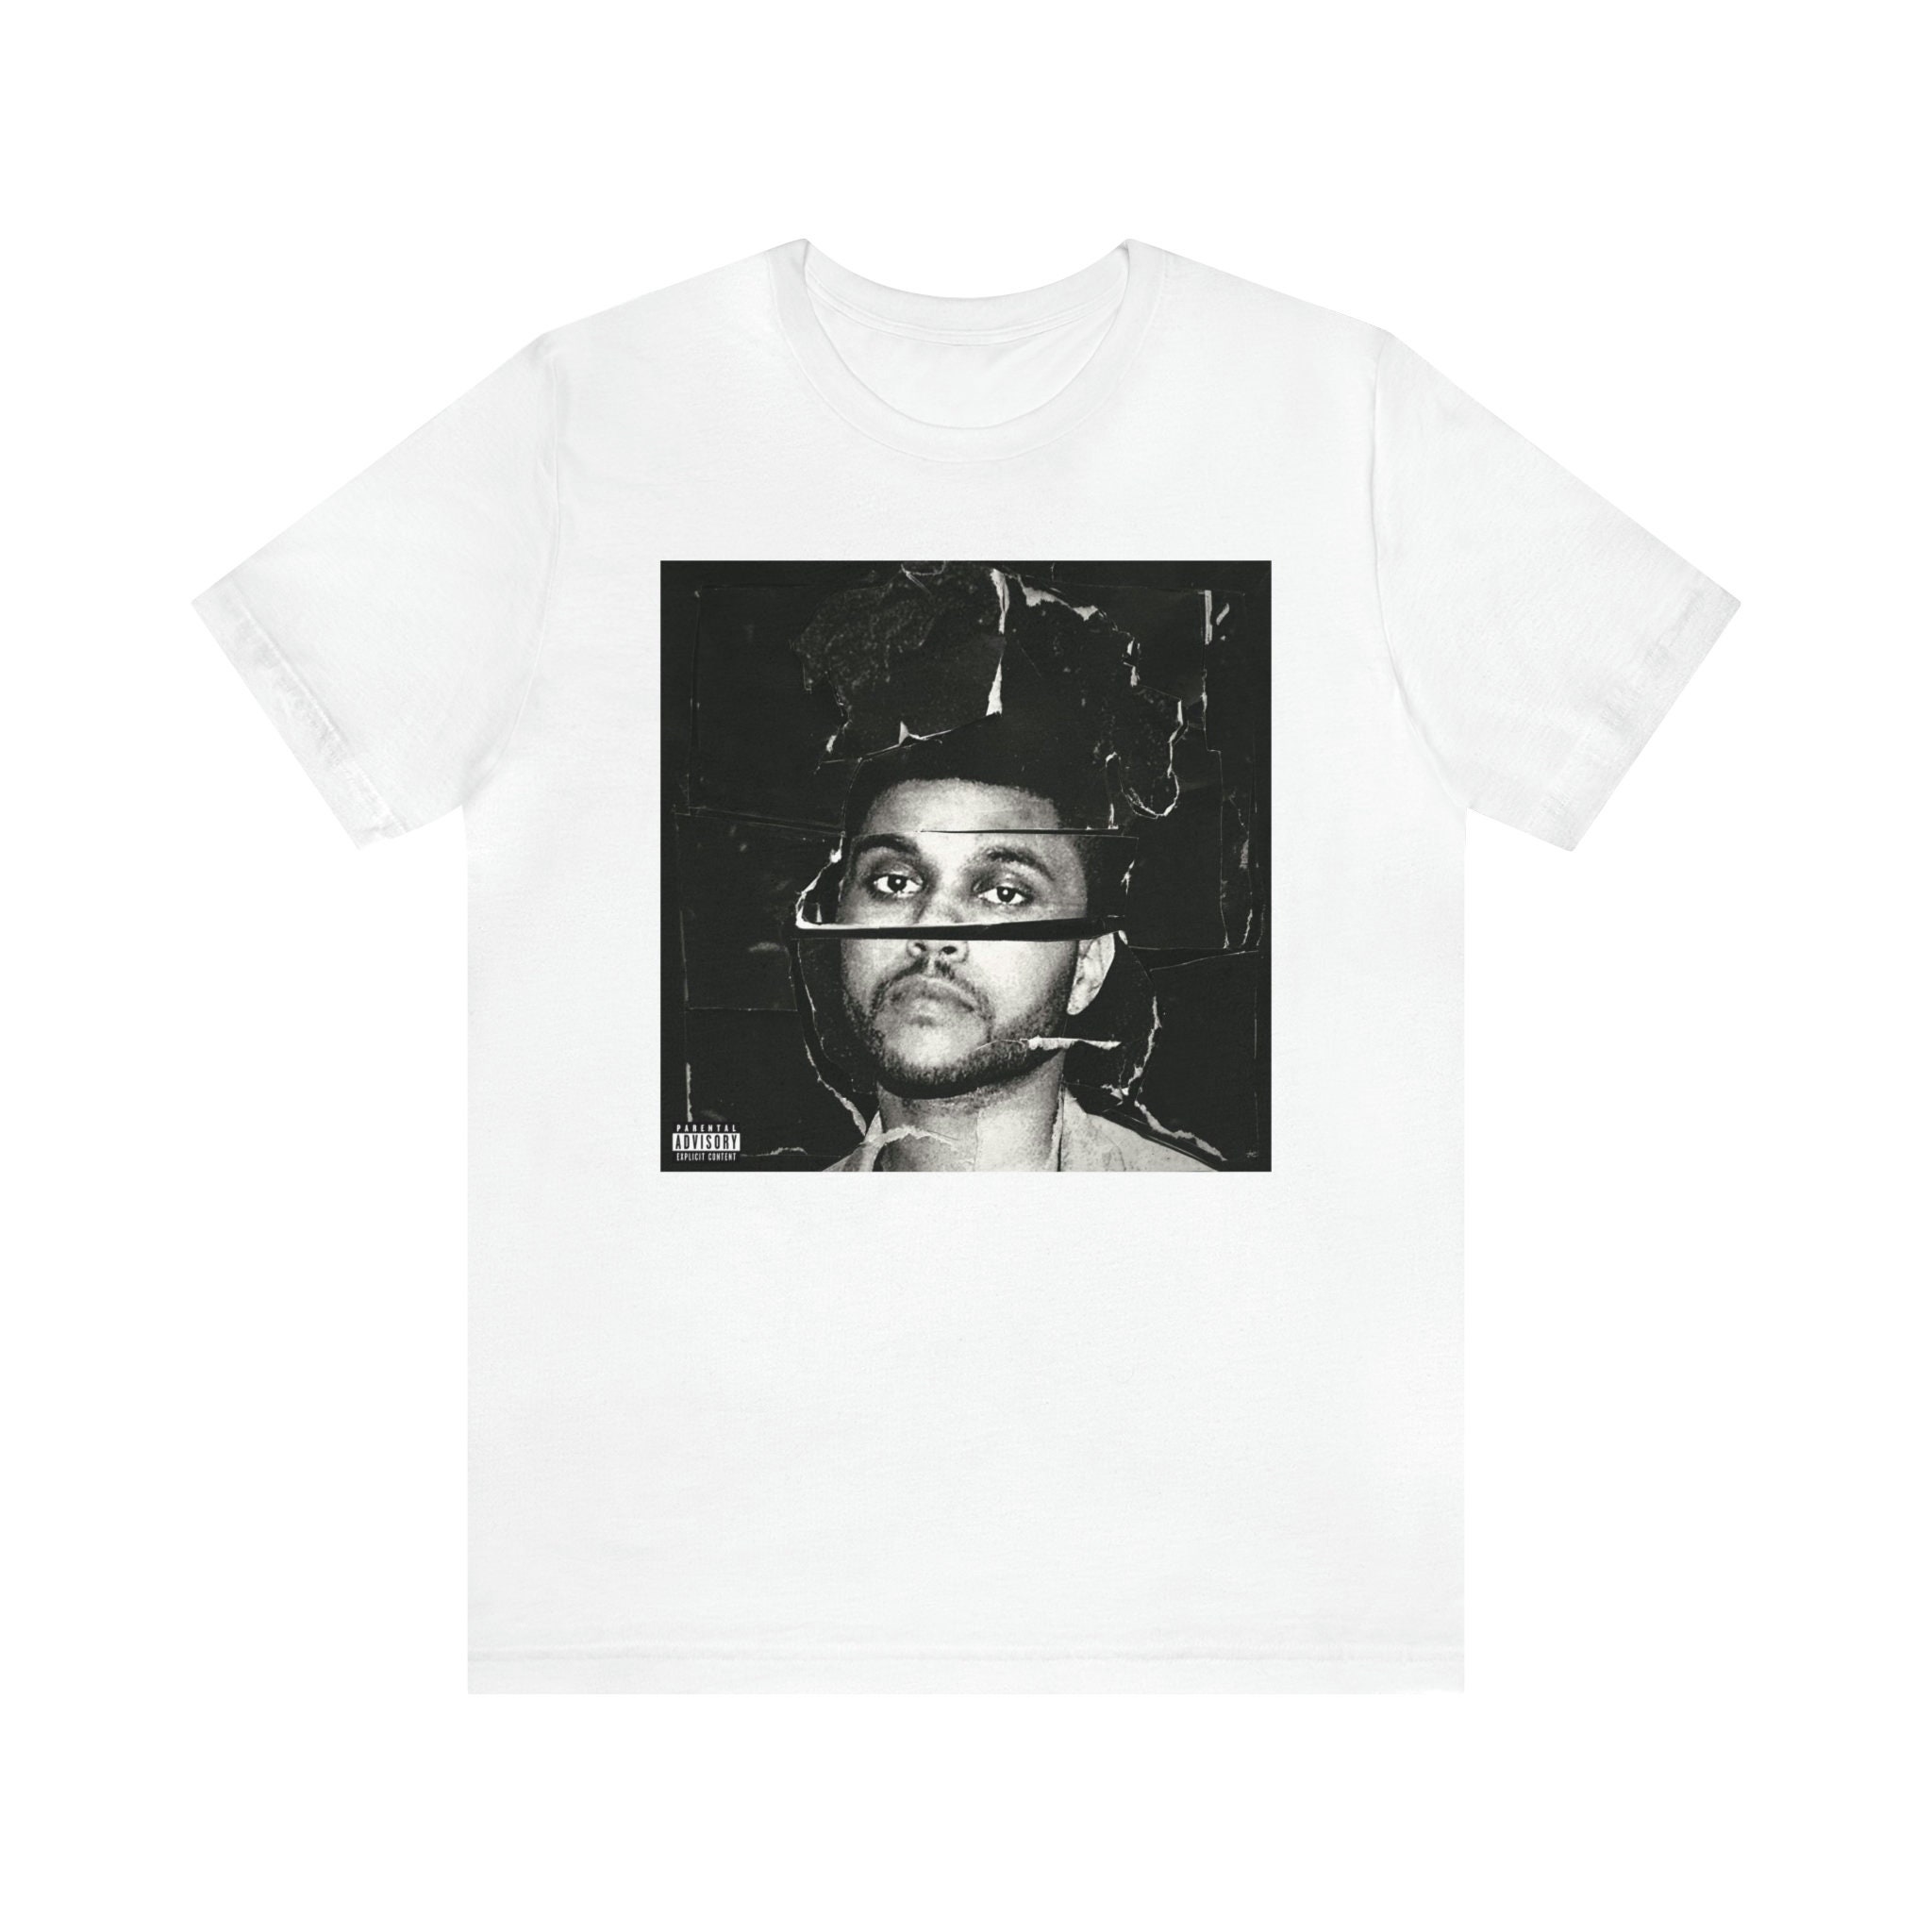 FREE shipping The Weeknd Beauty Behind the Madness Shirt, Unisex